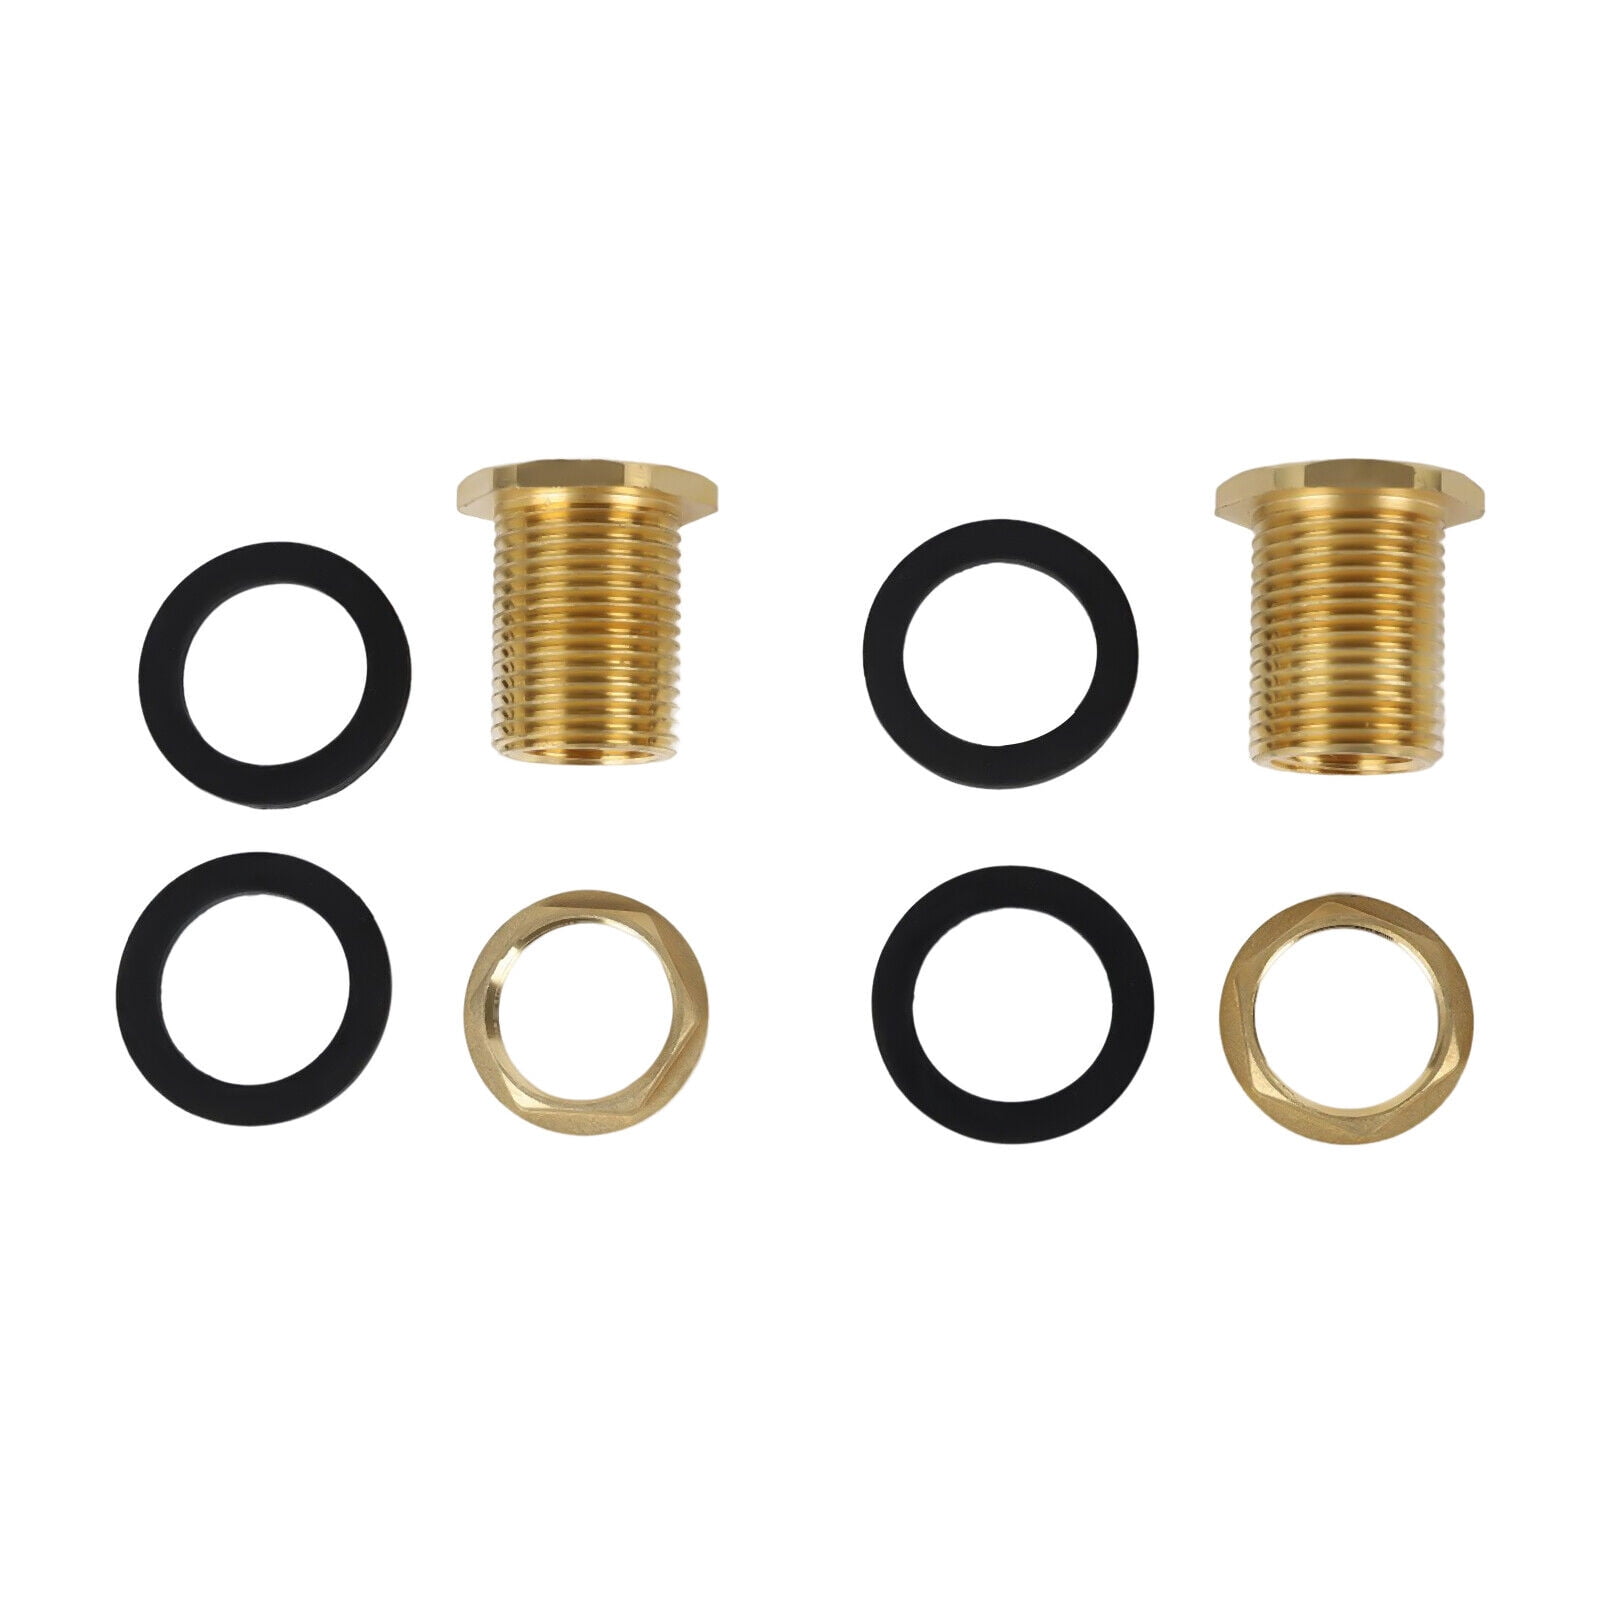 Hooshing Brass Bulkhead Fitting 1 Inch Male 1 Inch Female Thead Soild Brass  Water Tank Connector with Rubber Ring Hose Adapter